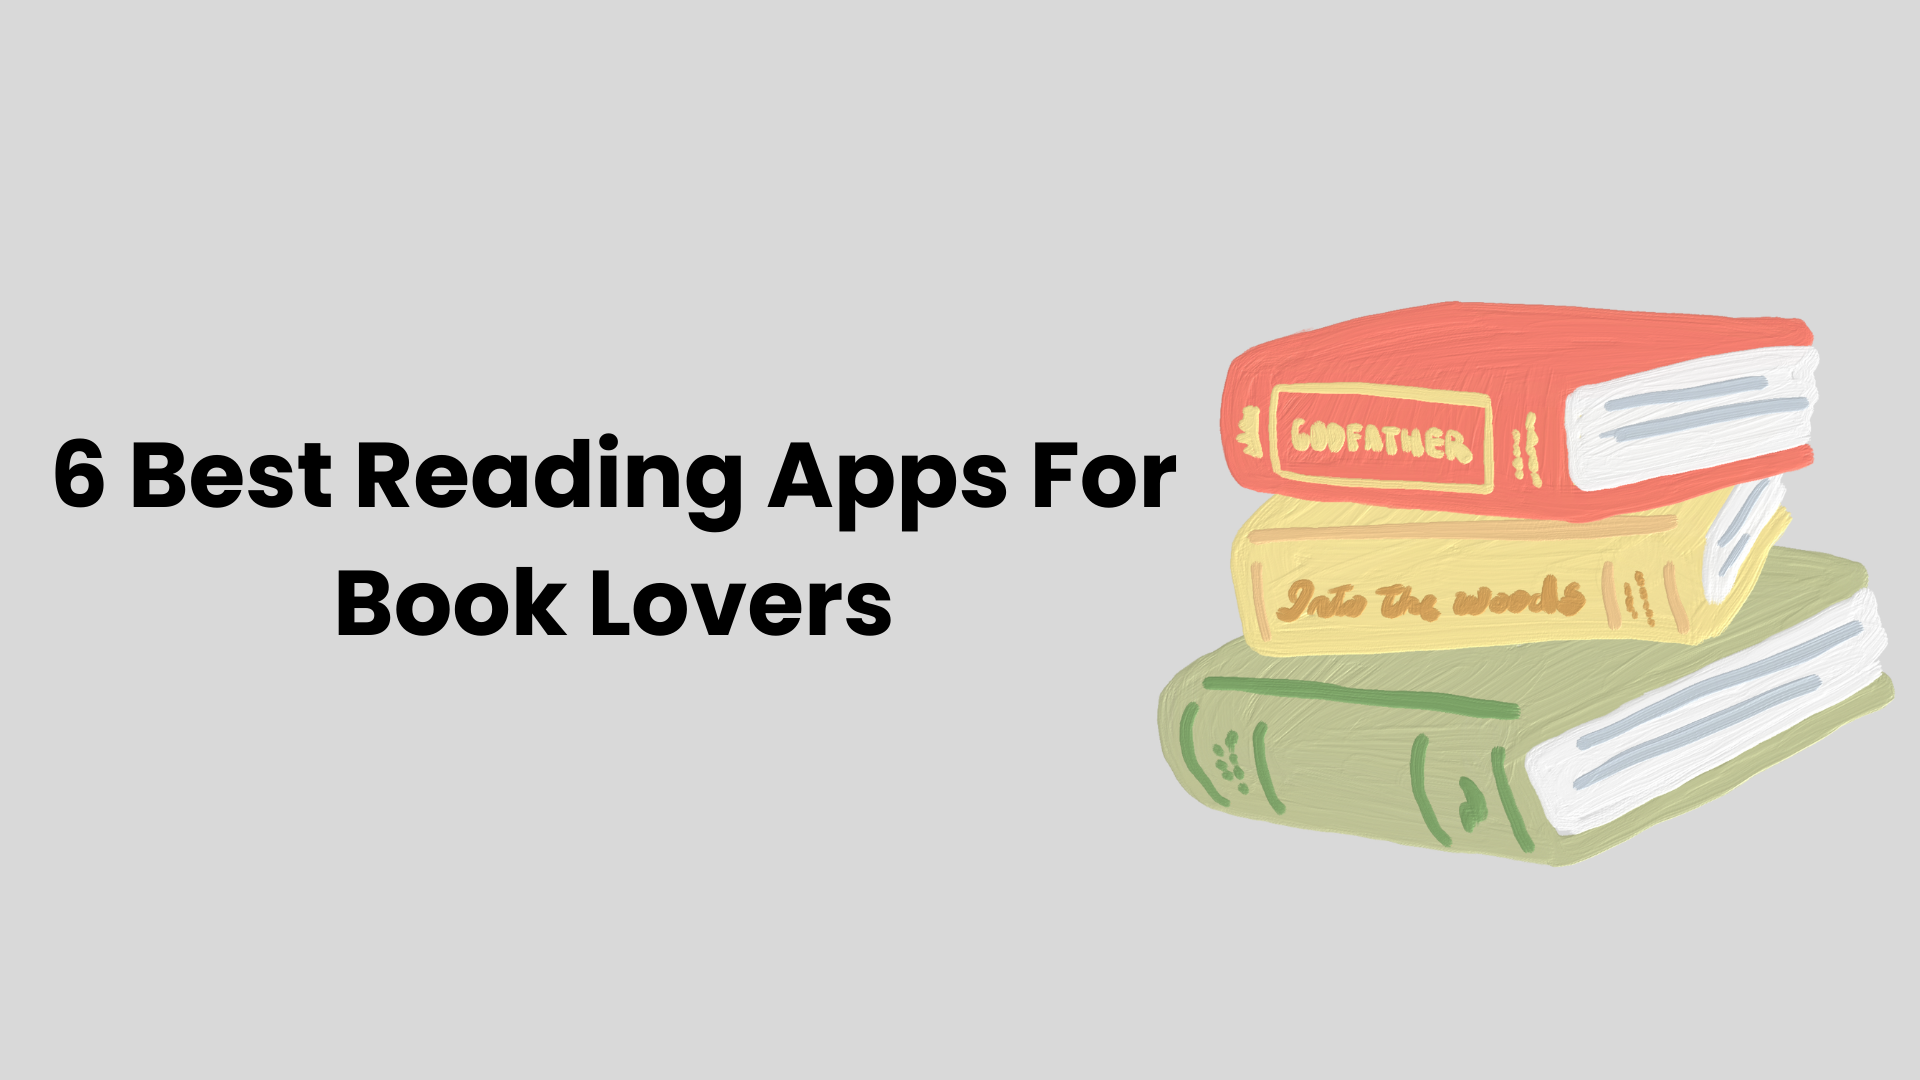 6 Best Reading Apps for Book Lovers